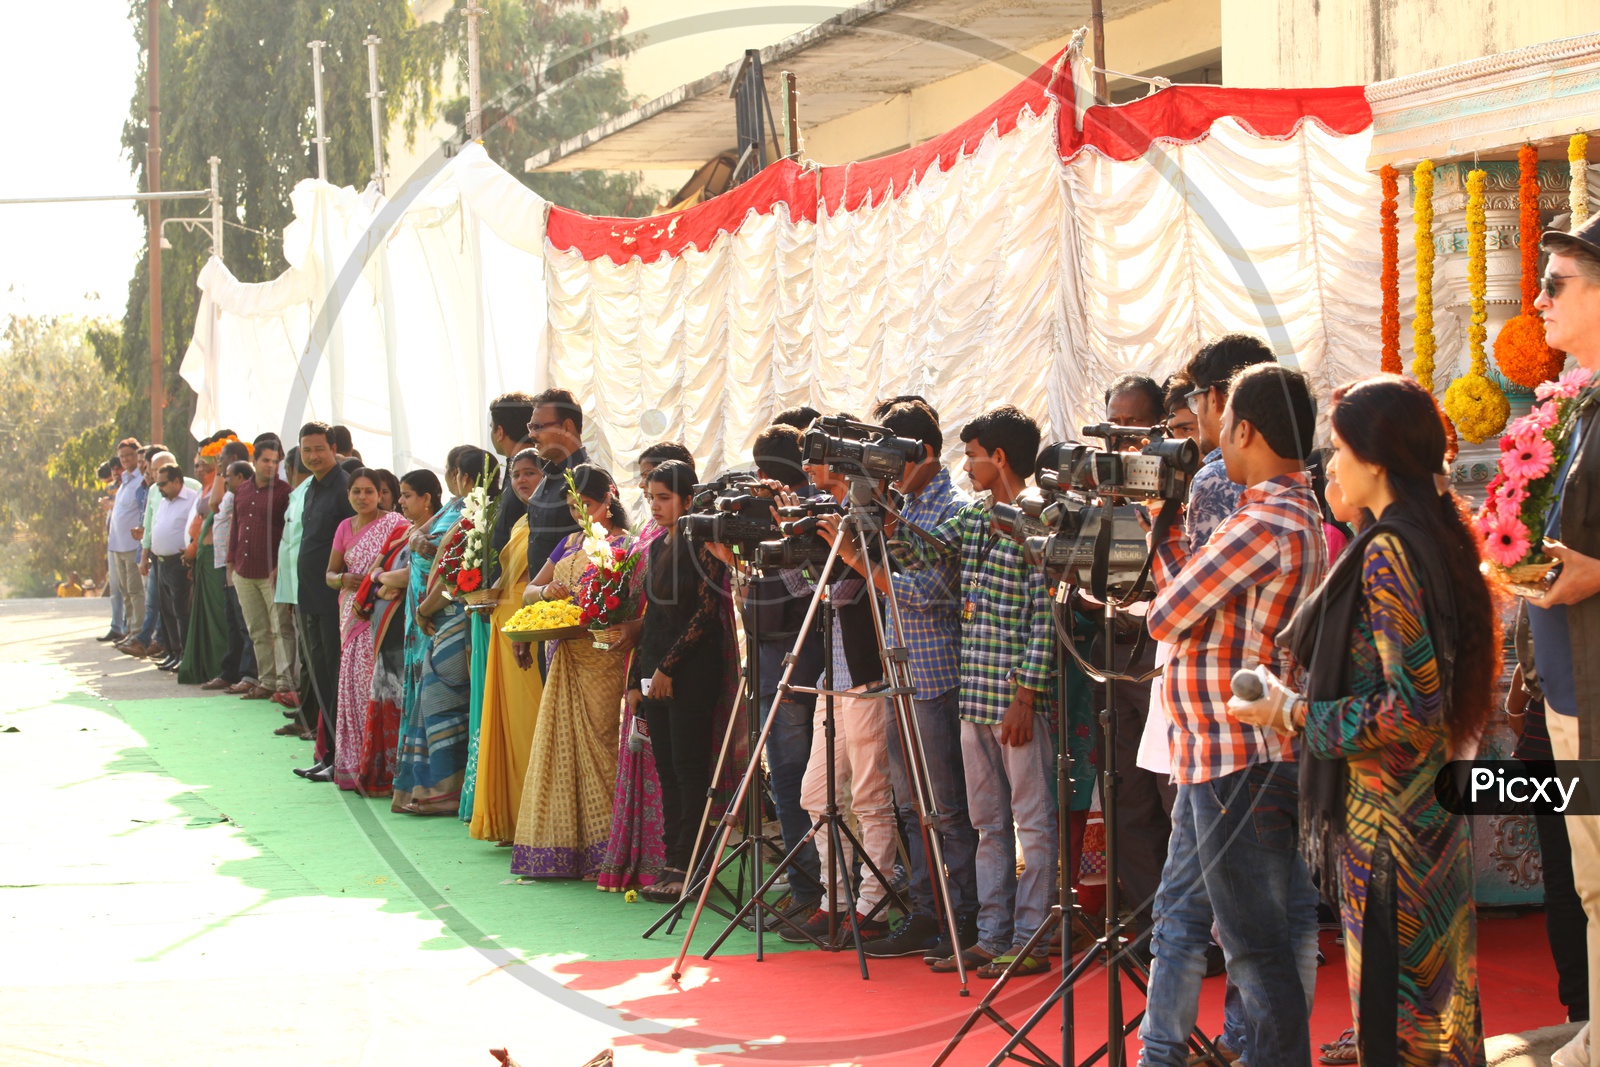 Media Covering an Dignitary Entry  to a Event